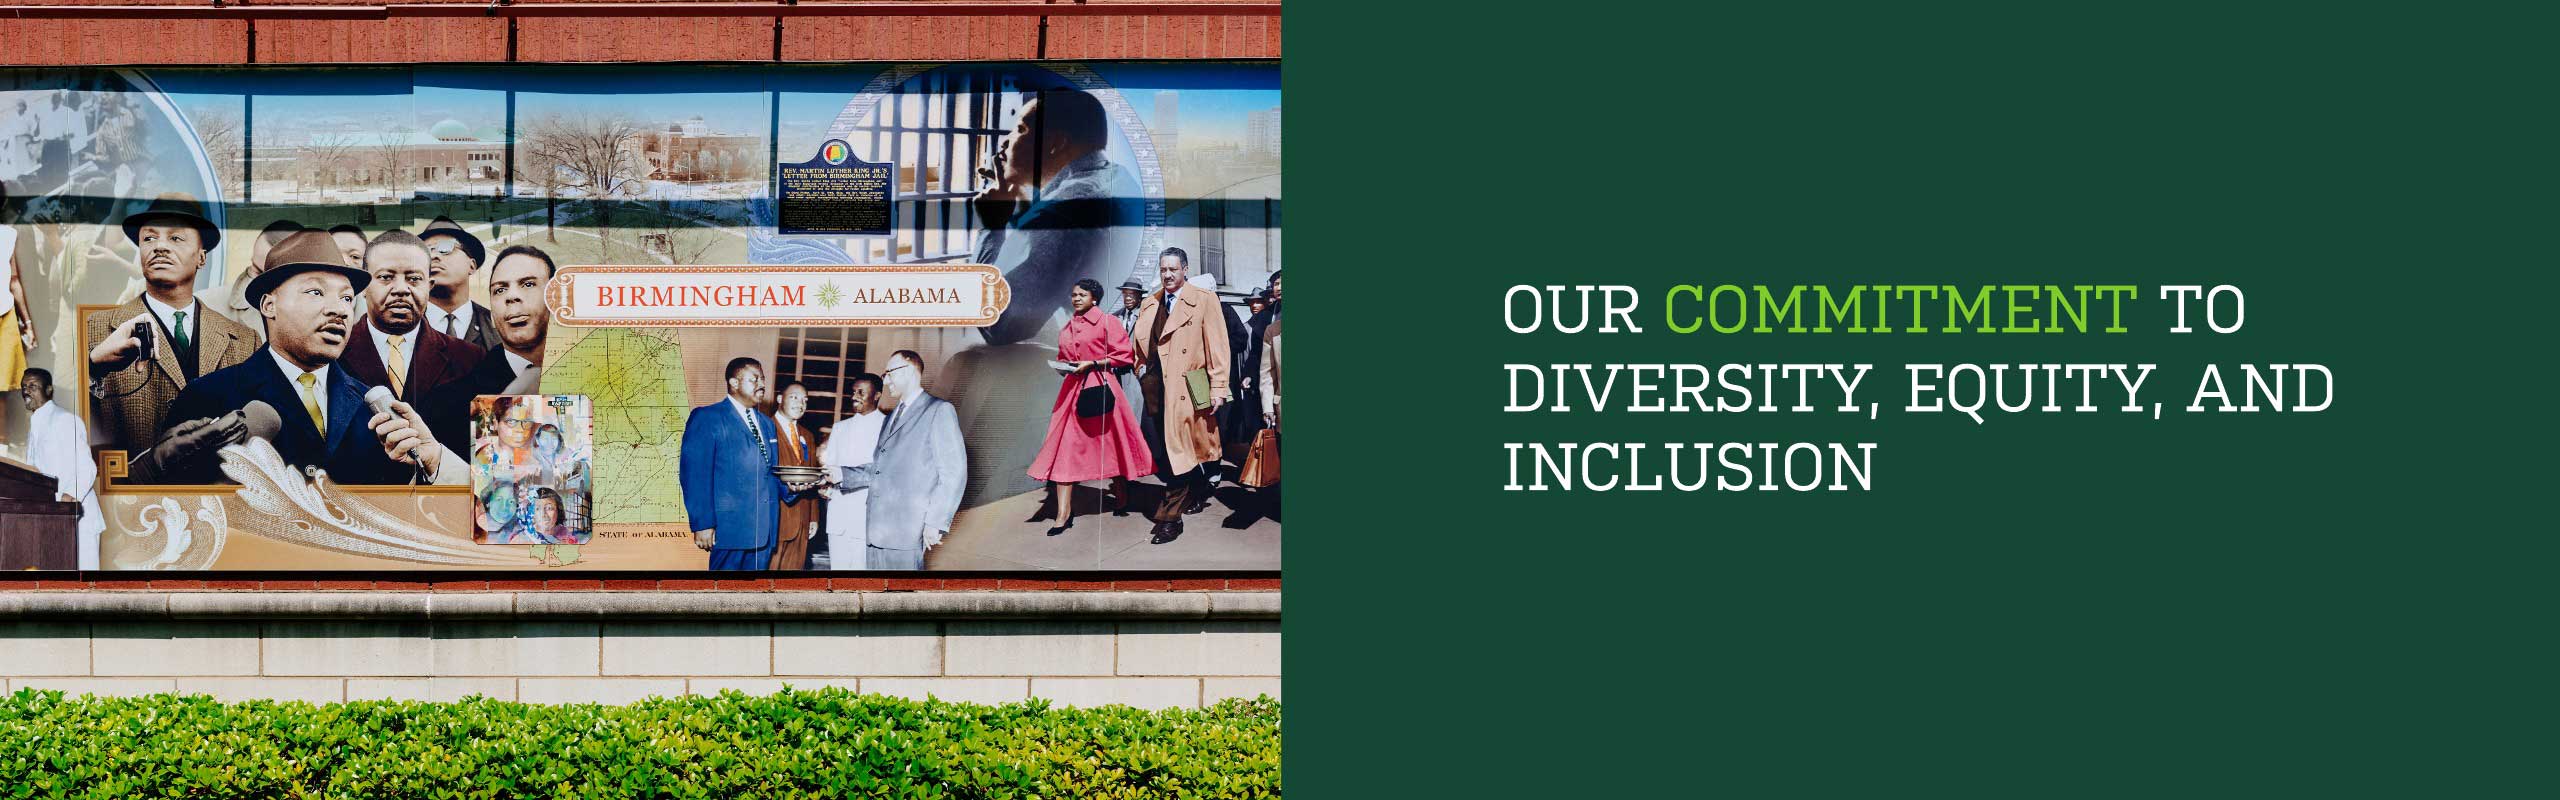 Our Commitment to Diversity, Equity, and Inclusion